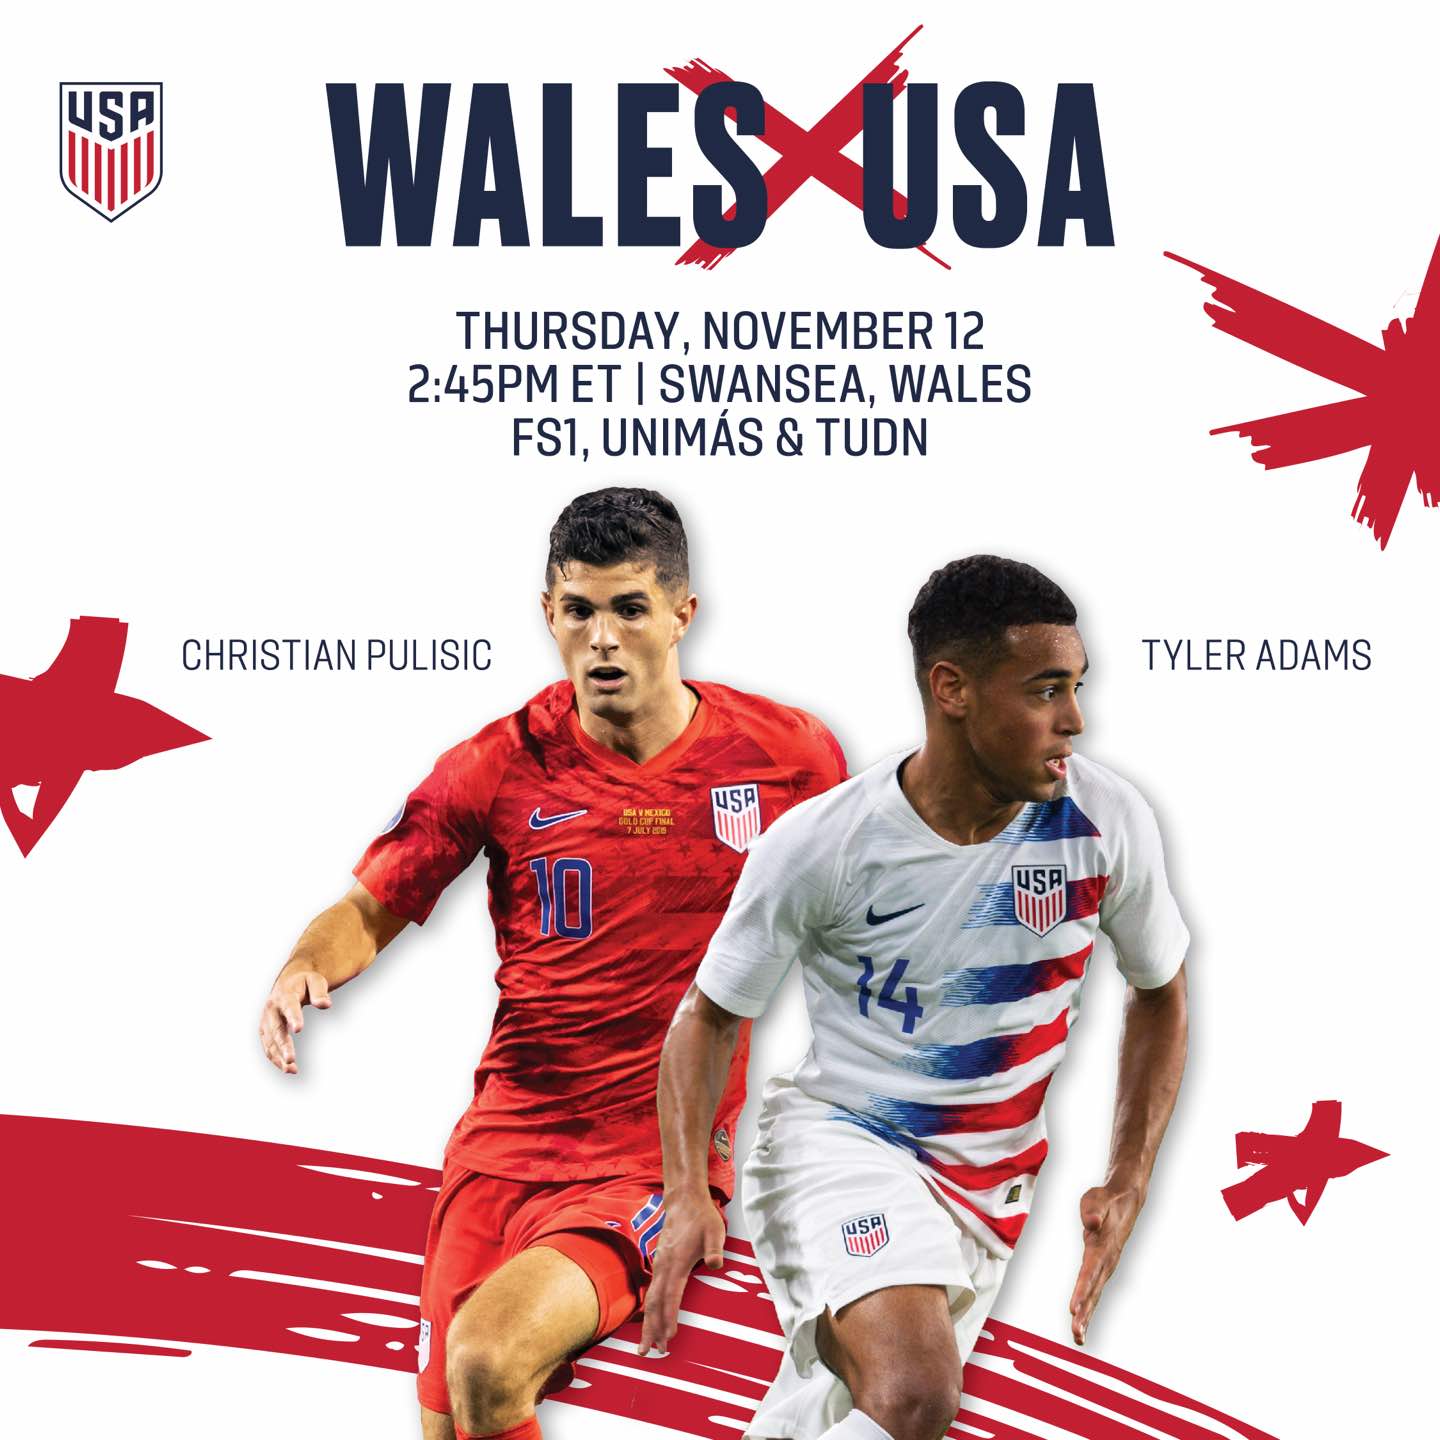 USA vs. Wales Friendly Announcement - USMNT Return to Action Nov. 12 in